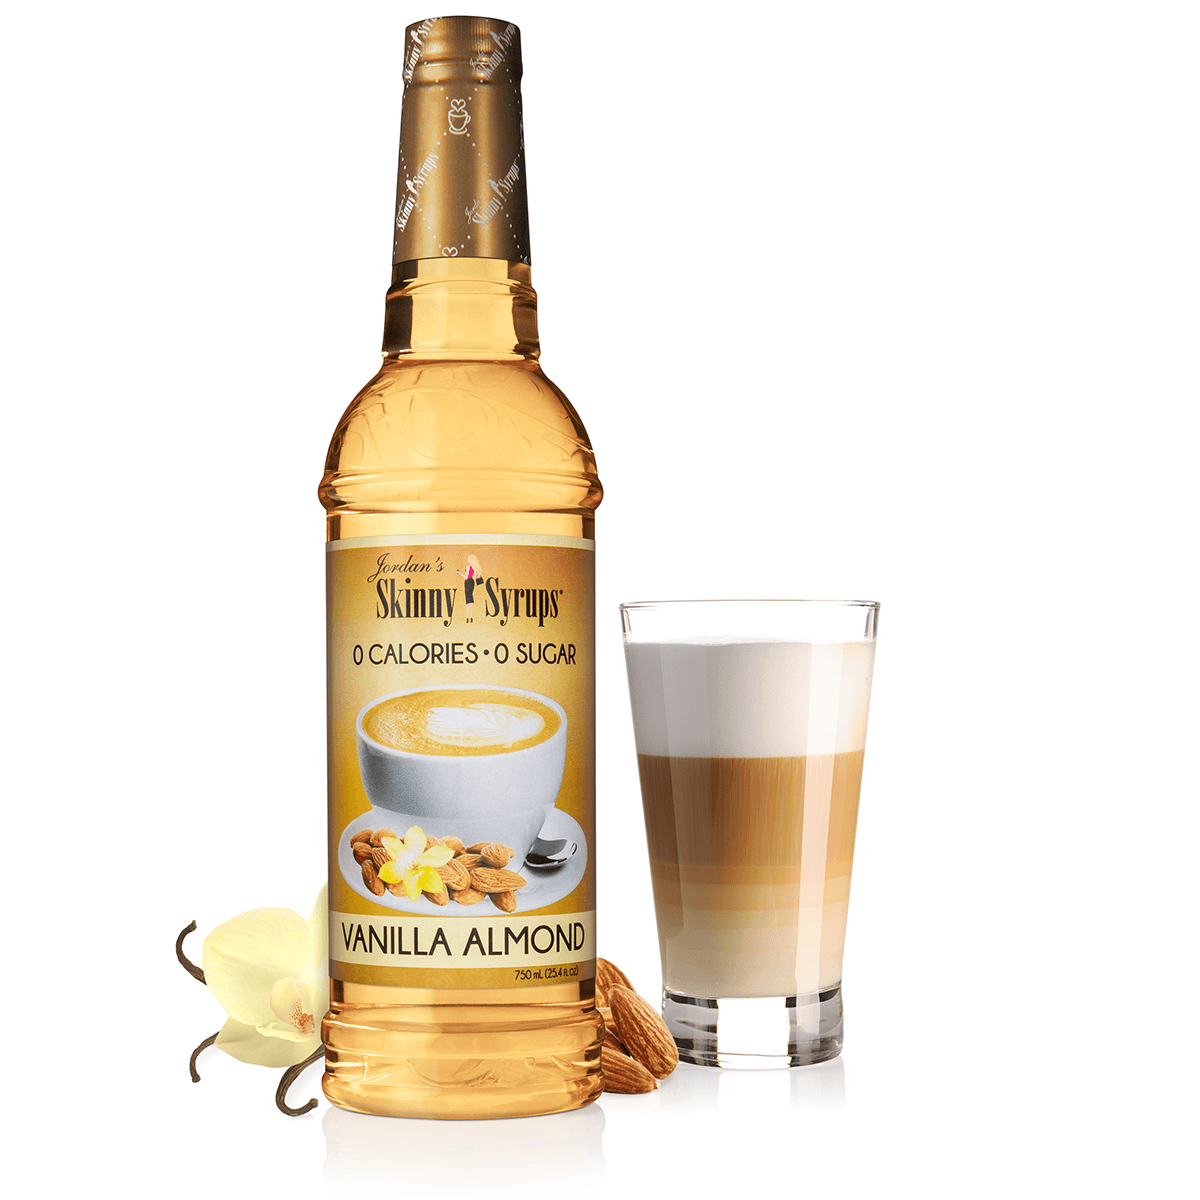 Sugar Free Vanilla Almond Syrup. Use code ‘DrinksTalk’ for a @skinnymixes discount.